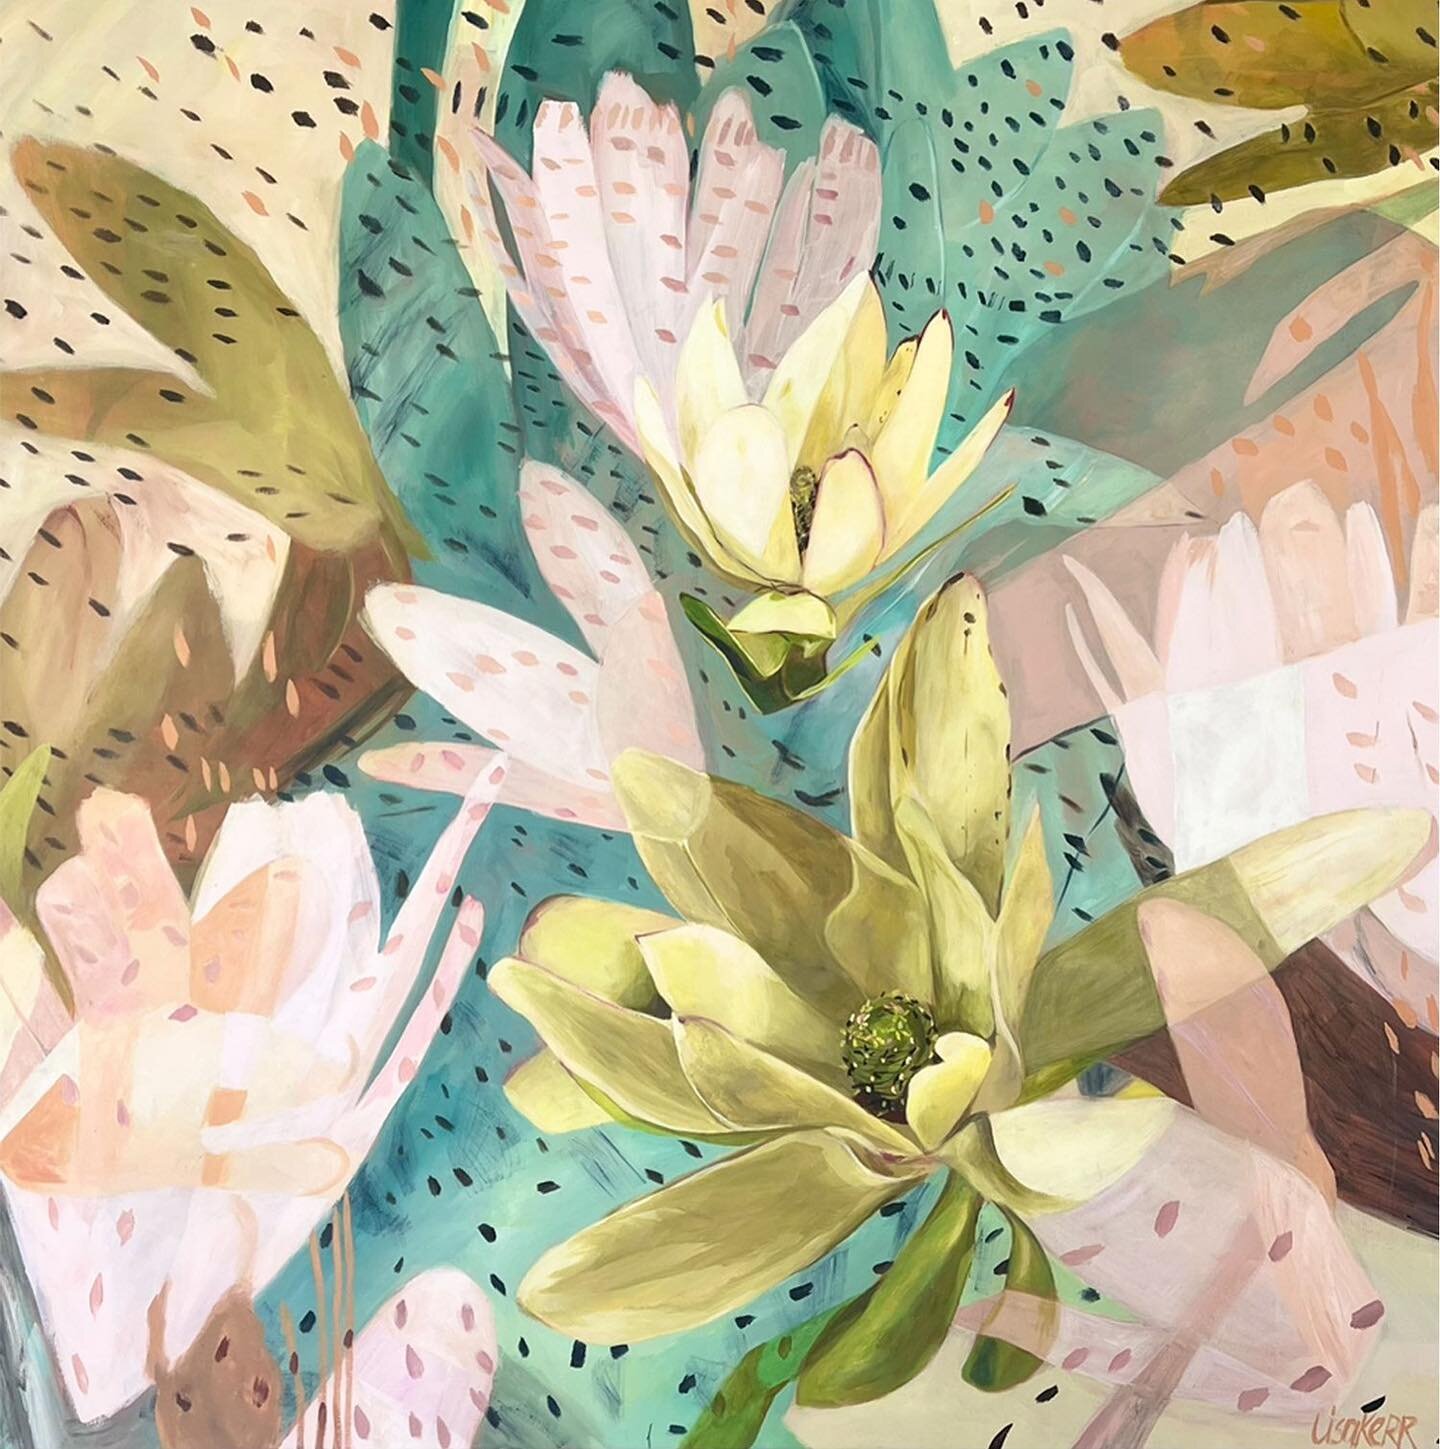 Happy Sunday! Today we&rsquo;re sharing &lsquo;Free Fall&rsquo; @lisa_kerr_art 🌼 🌸🌼

&ldquo;This painting I have tried to capture flowers on the wind, or seeds, or both. A free fall has equal measure of risk and freedom in it, and the joy of movem